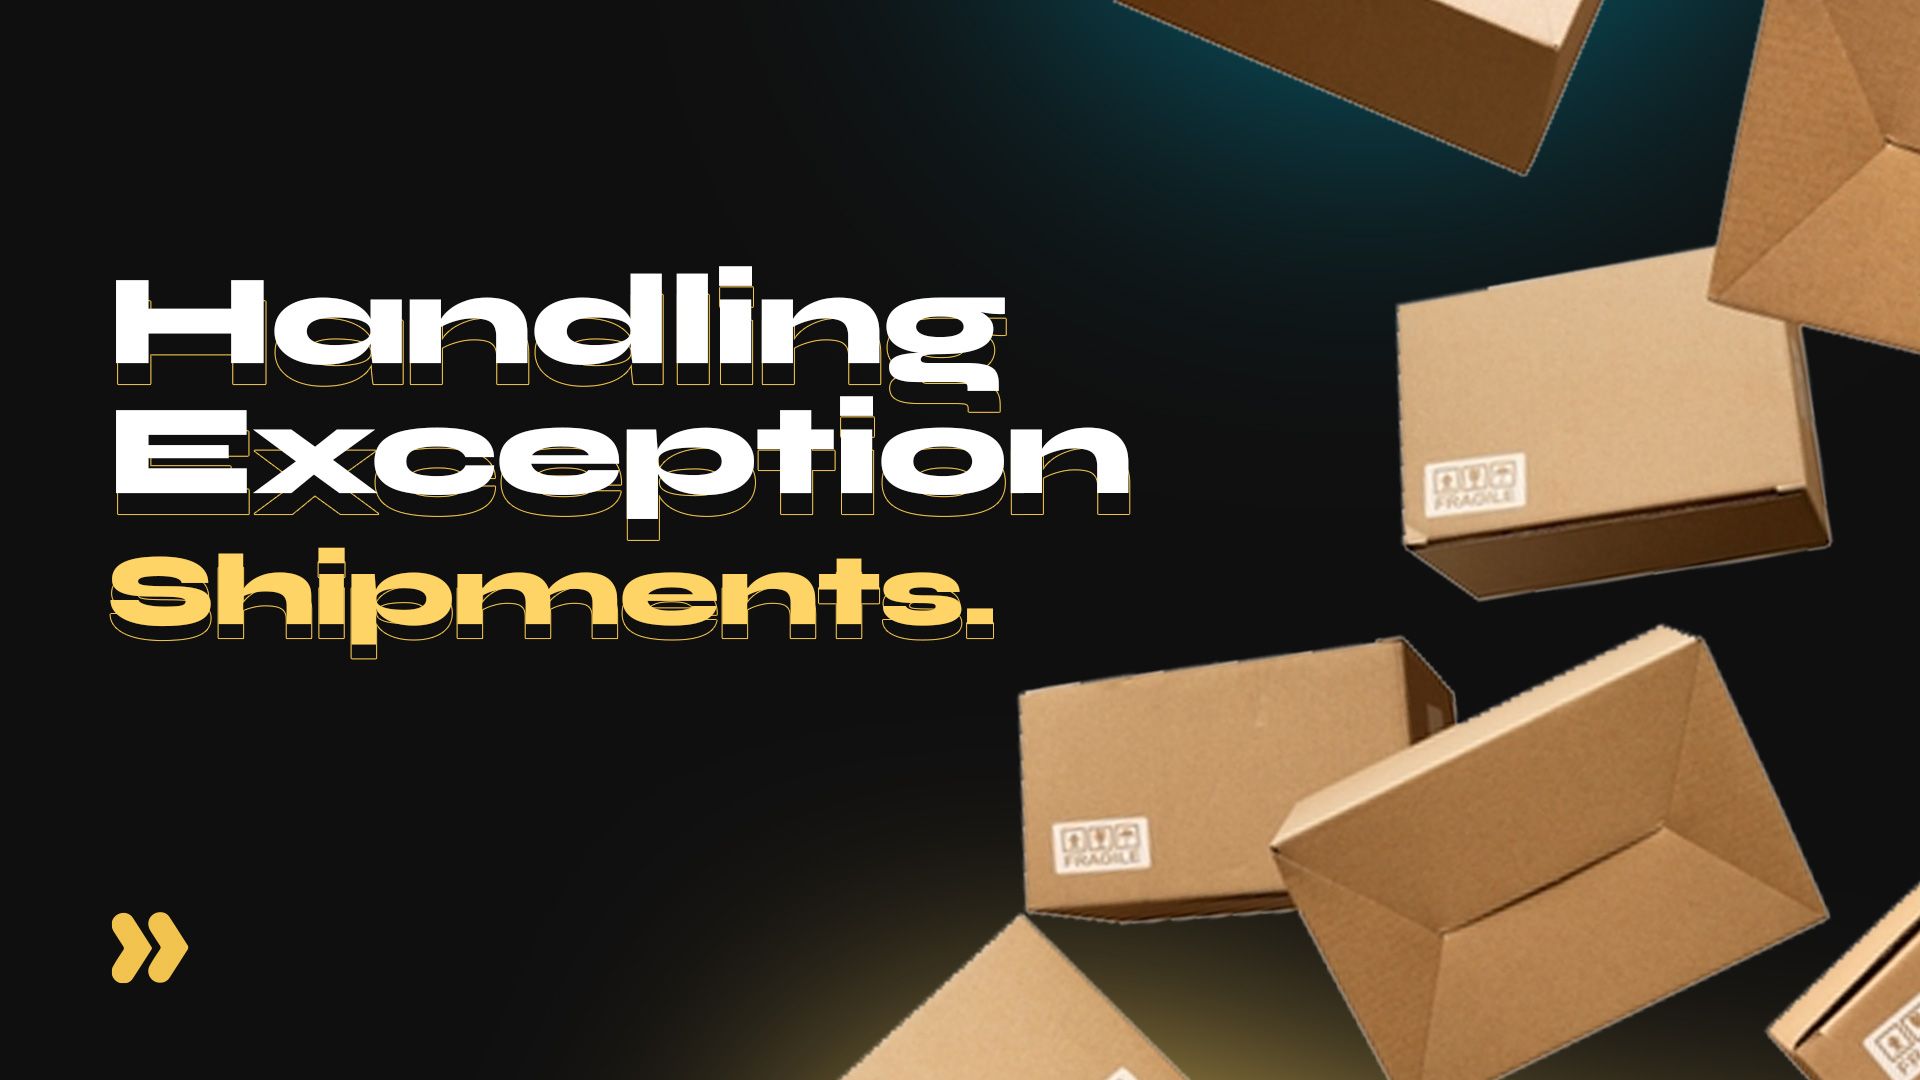 Get A Free Inside Look of How Heroshe Handles Exception Shipments